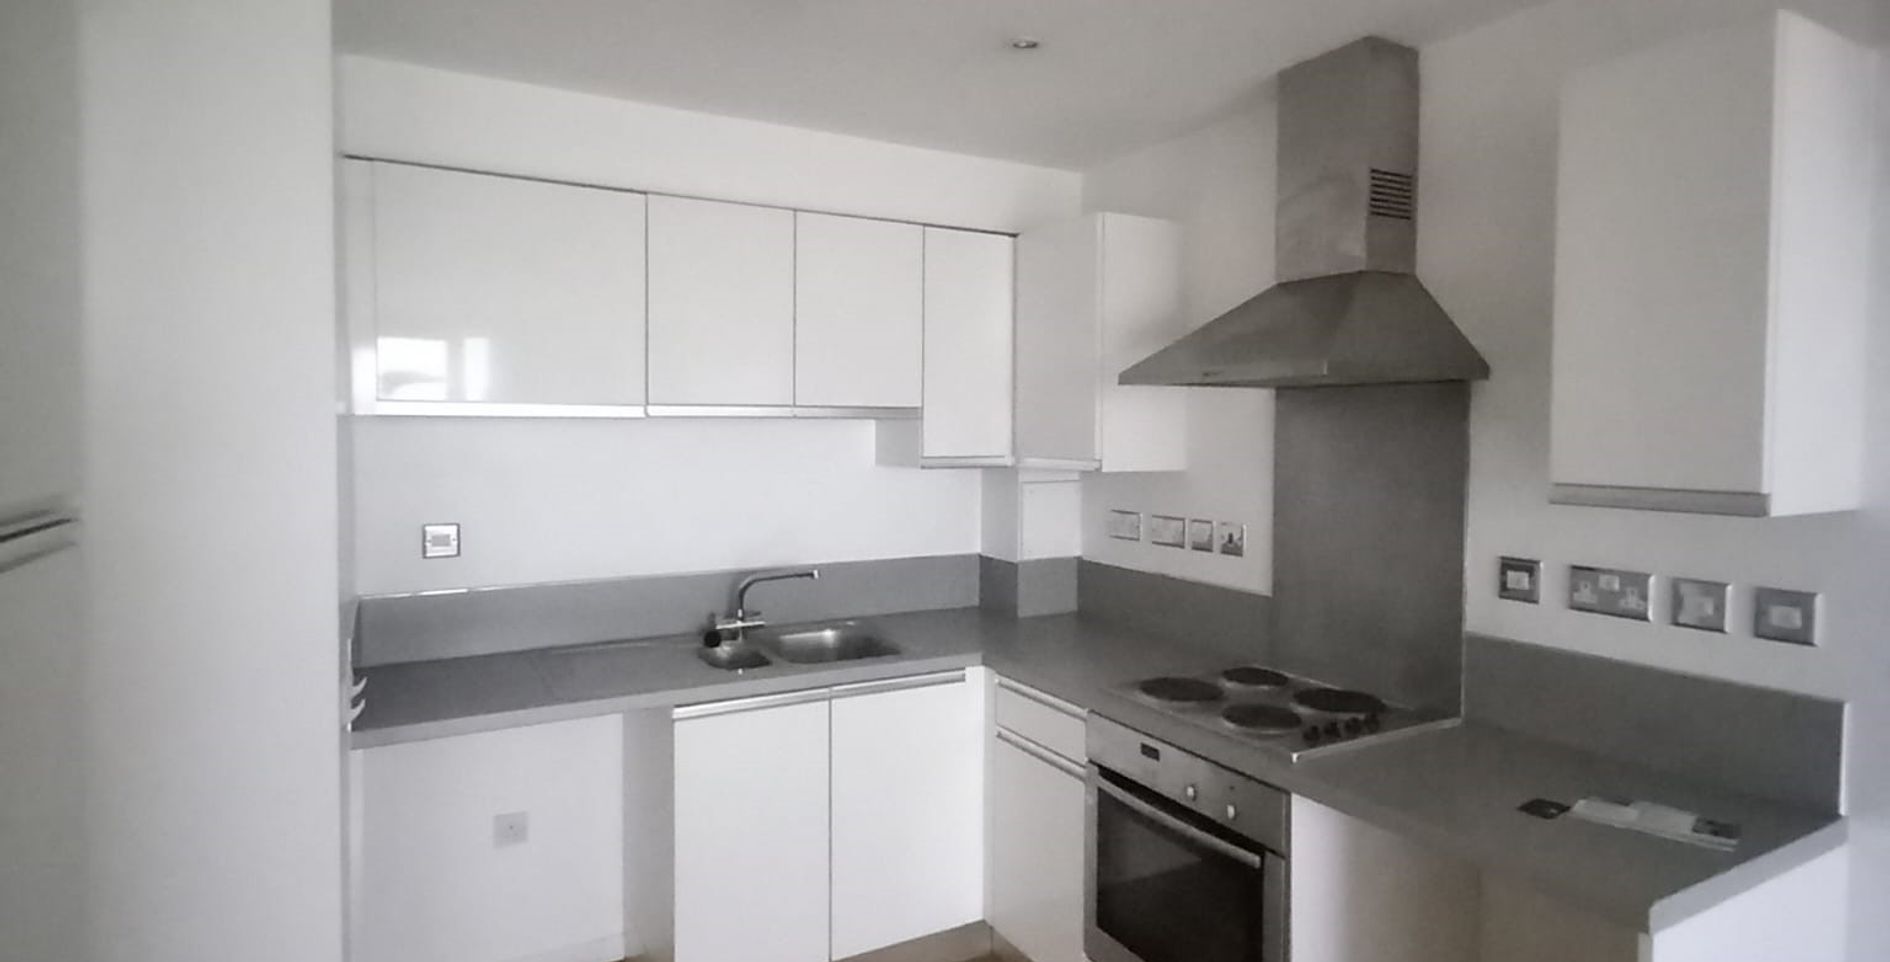 E14 9LS – 2 bedroom apartment in Tower Hamlets – Share to Buy